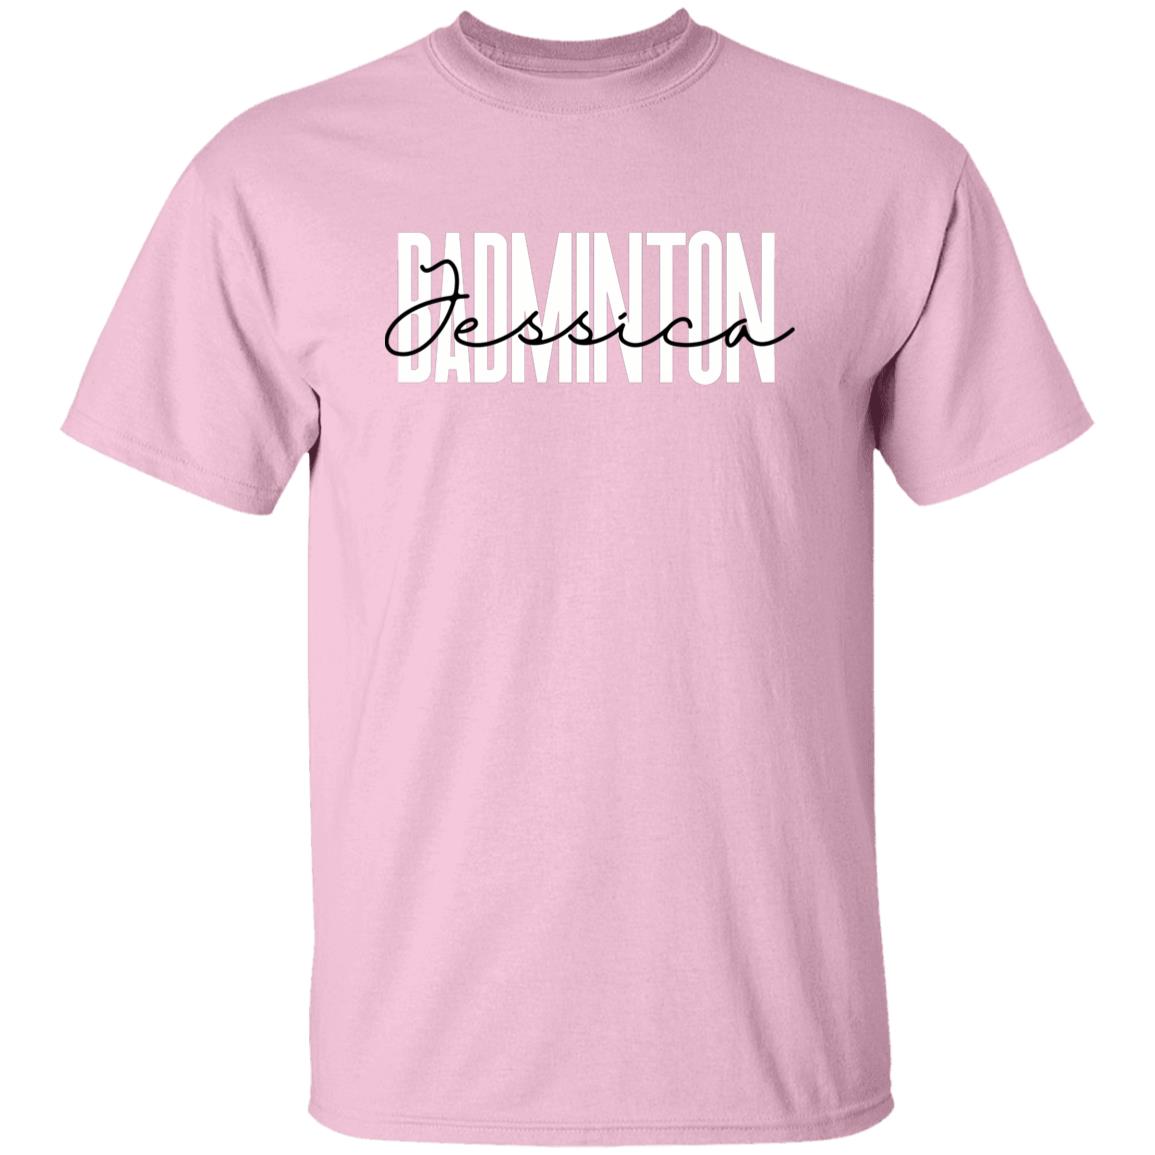 Personalized Badminton Unisex T-shirt Custom name Badminton player Sand Blue Pink-Family-Gift-Planet